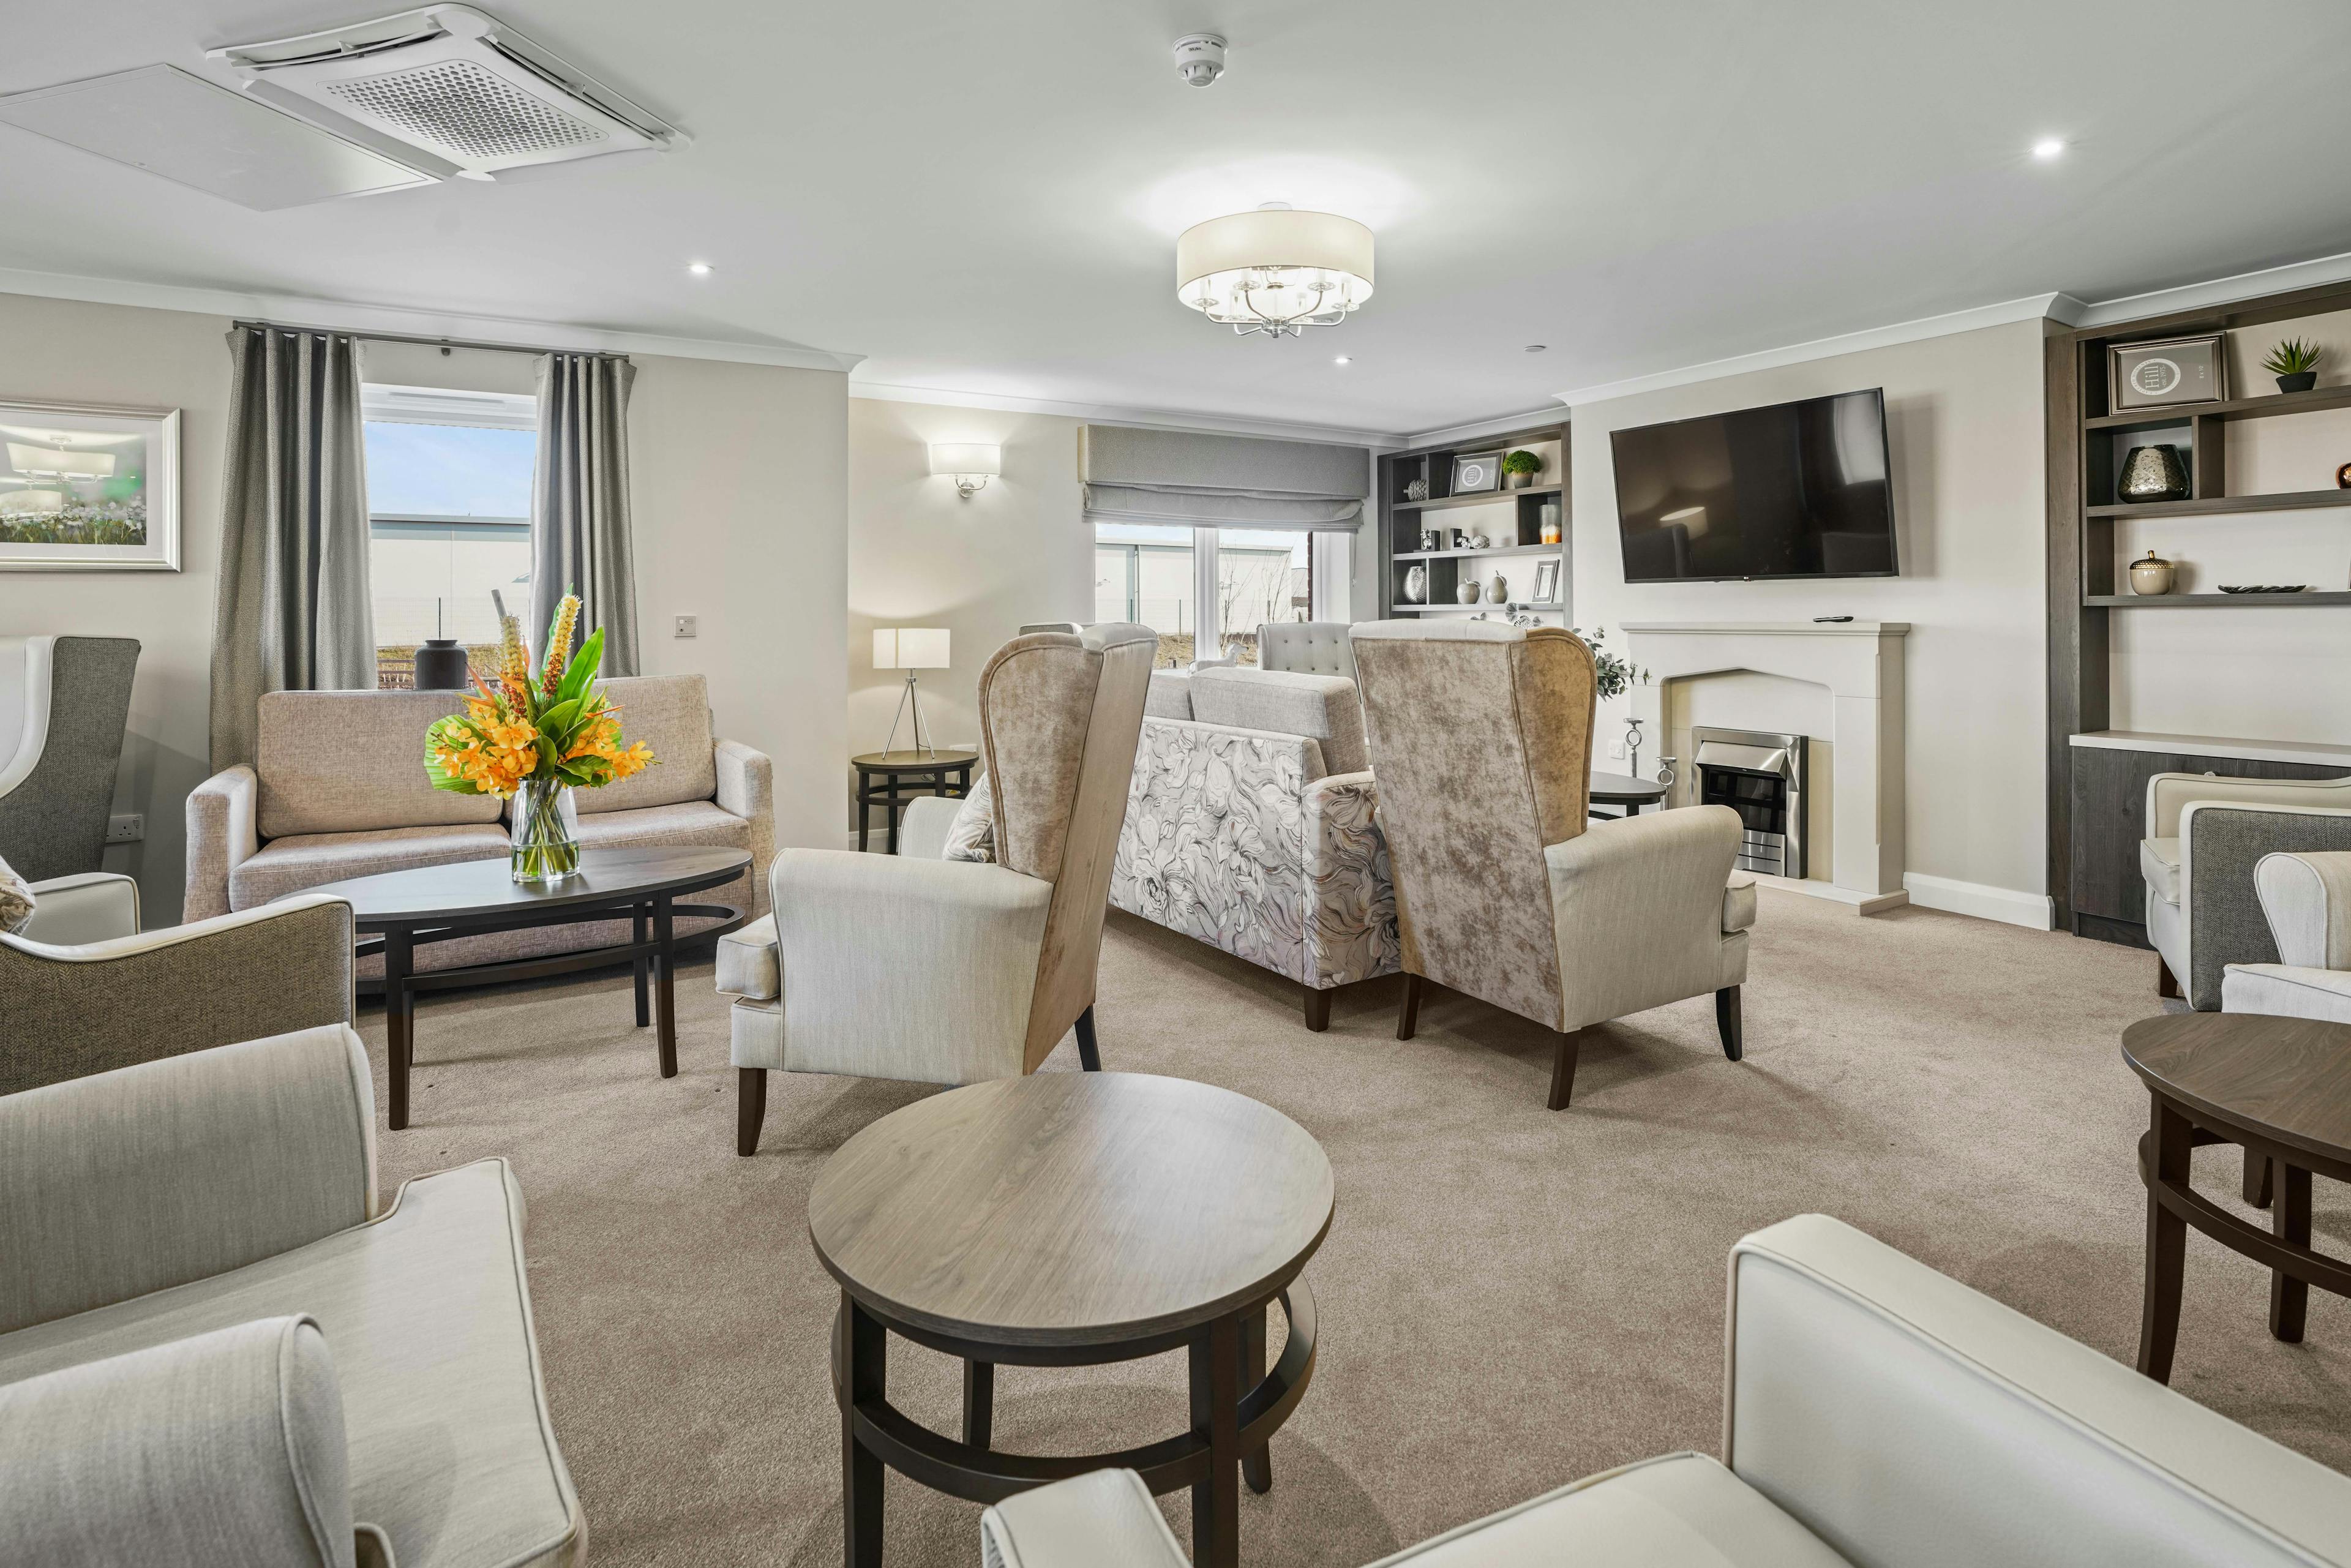 Lounge of Toray Pines care home in Woodhall Spa, Lincolnshire